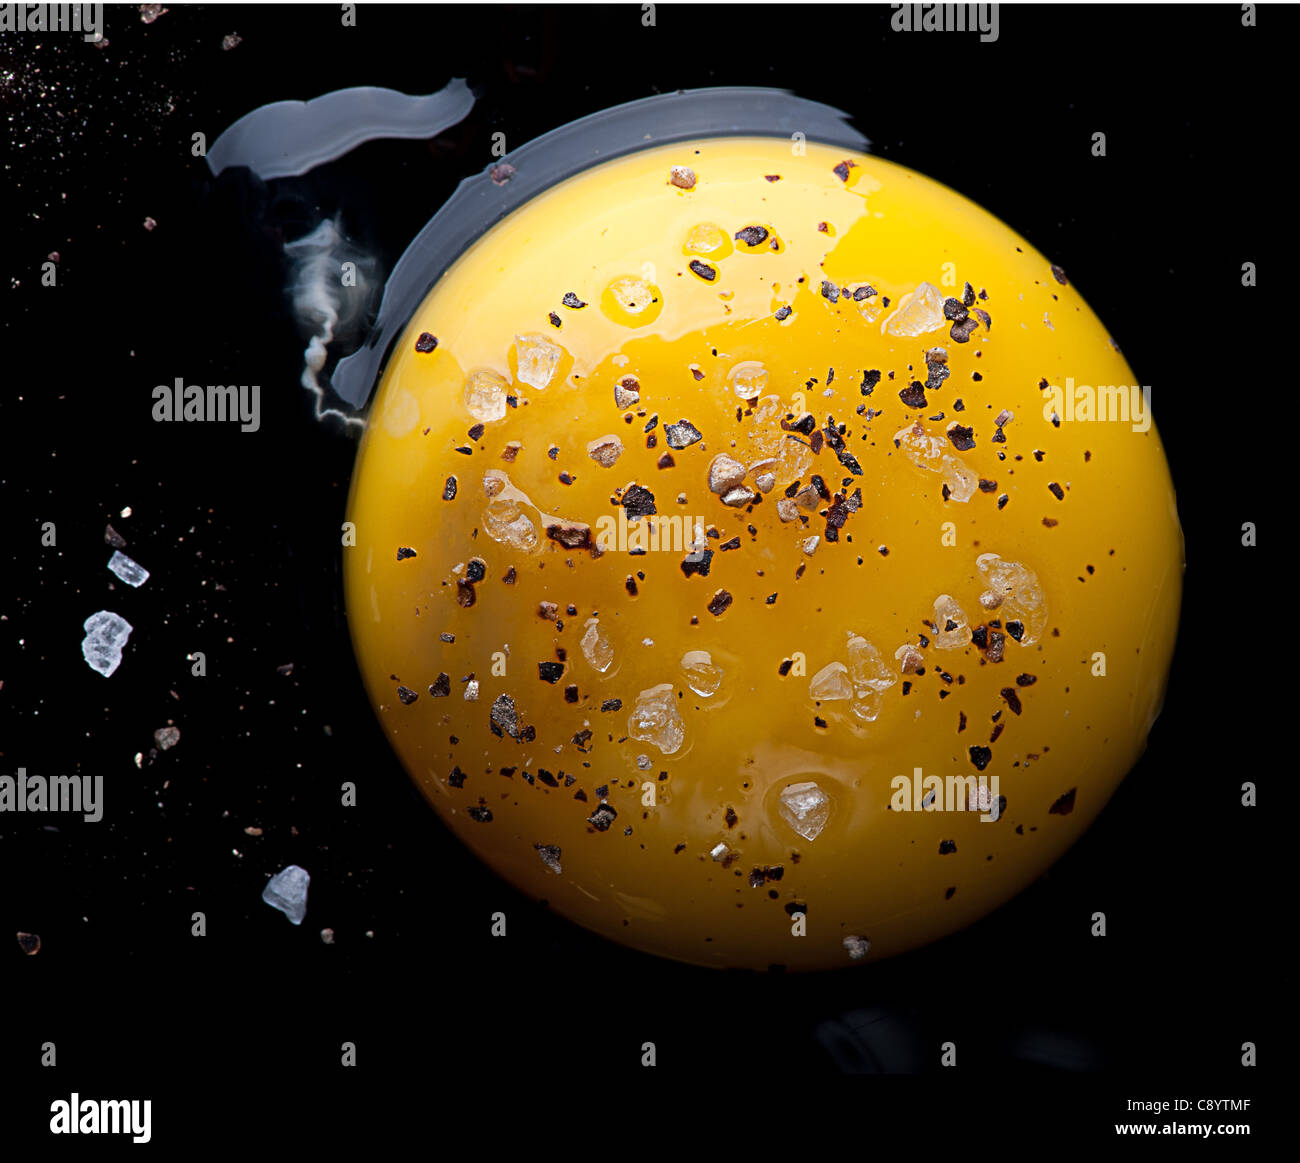 Aerial view of a Raw egg and egg yolk on a black reflecting surface with salt and pepper. Stock Photo